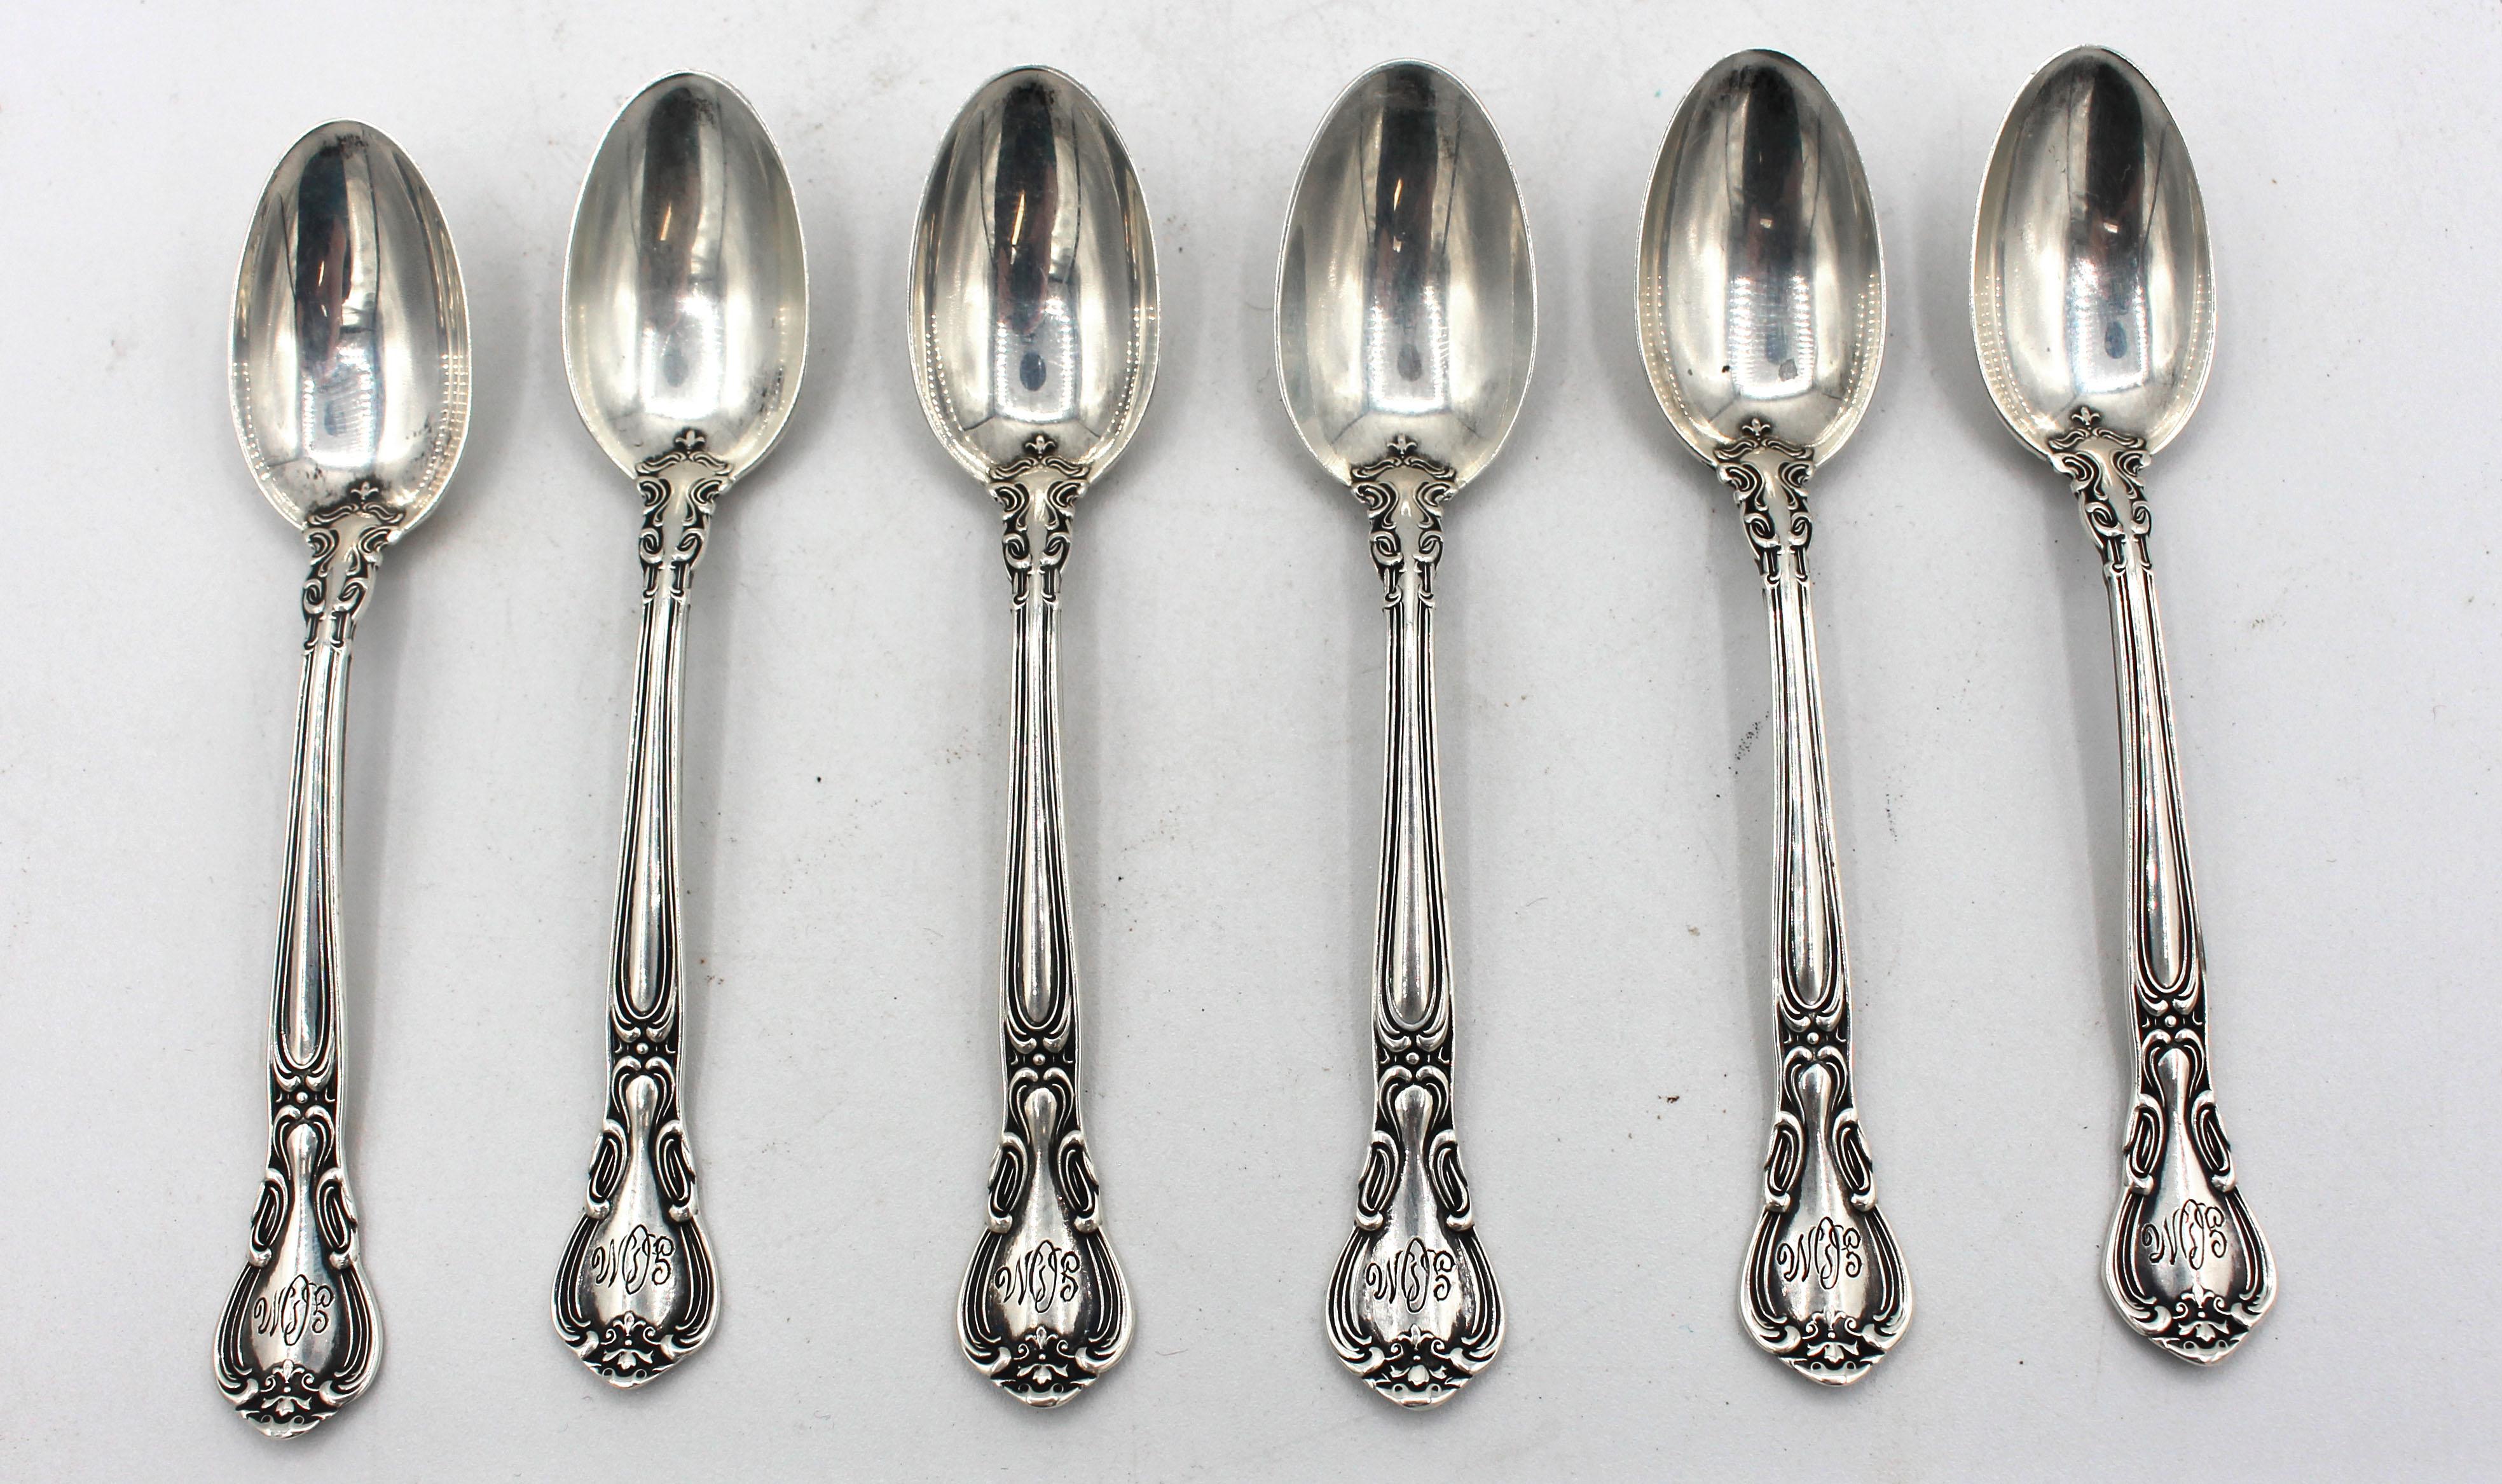 Set of 6 Chantilly pattern sterling silver demitasse spoons by Gorham, c.1920s. Rare found. Antique set with monogram. 1.95 troy oz.
4 1/8